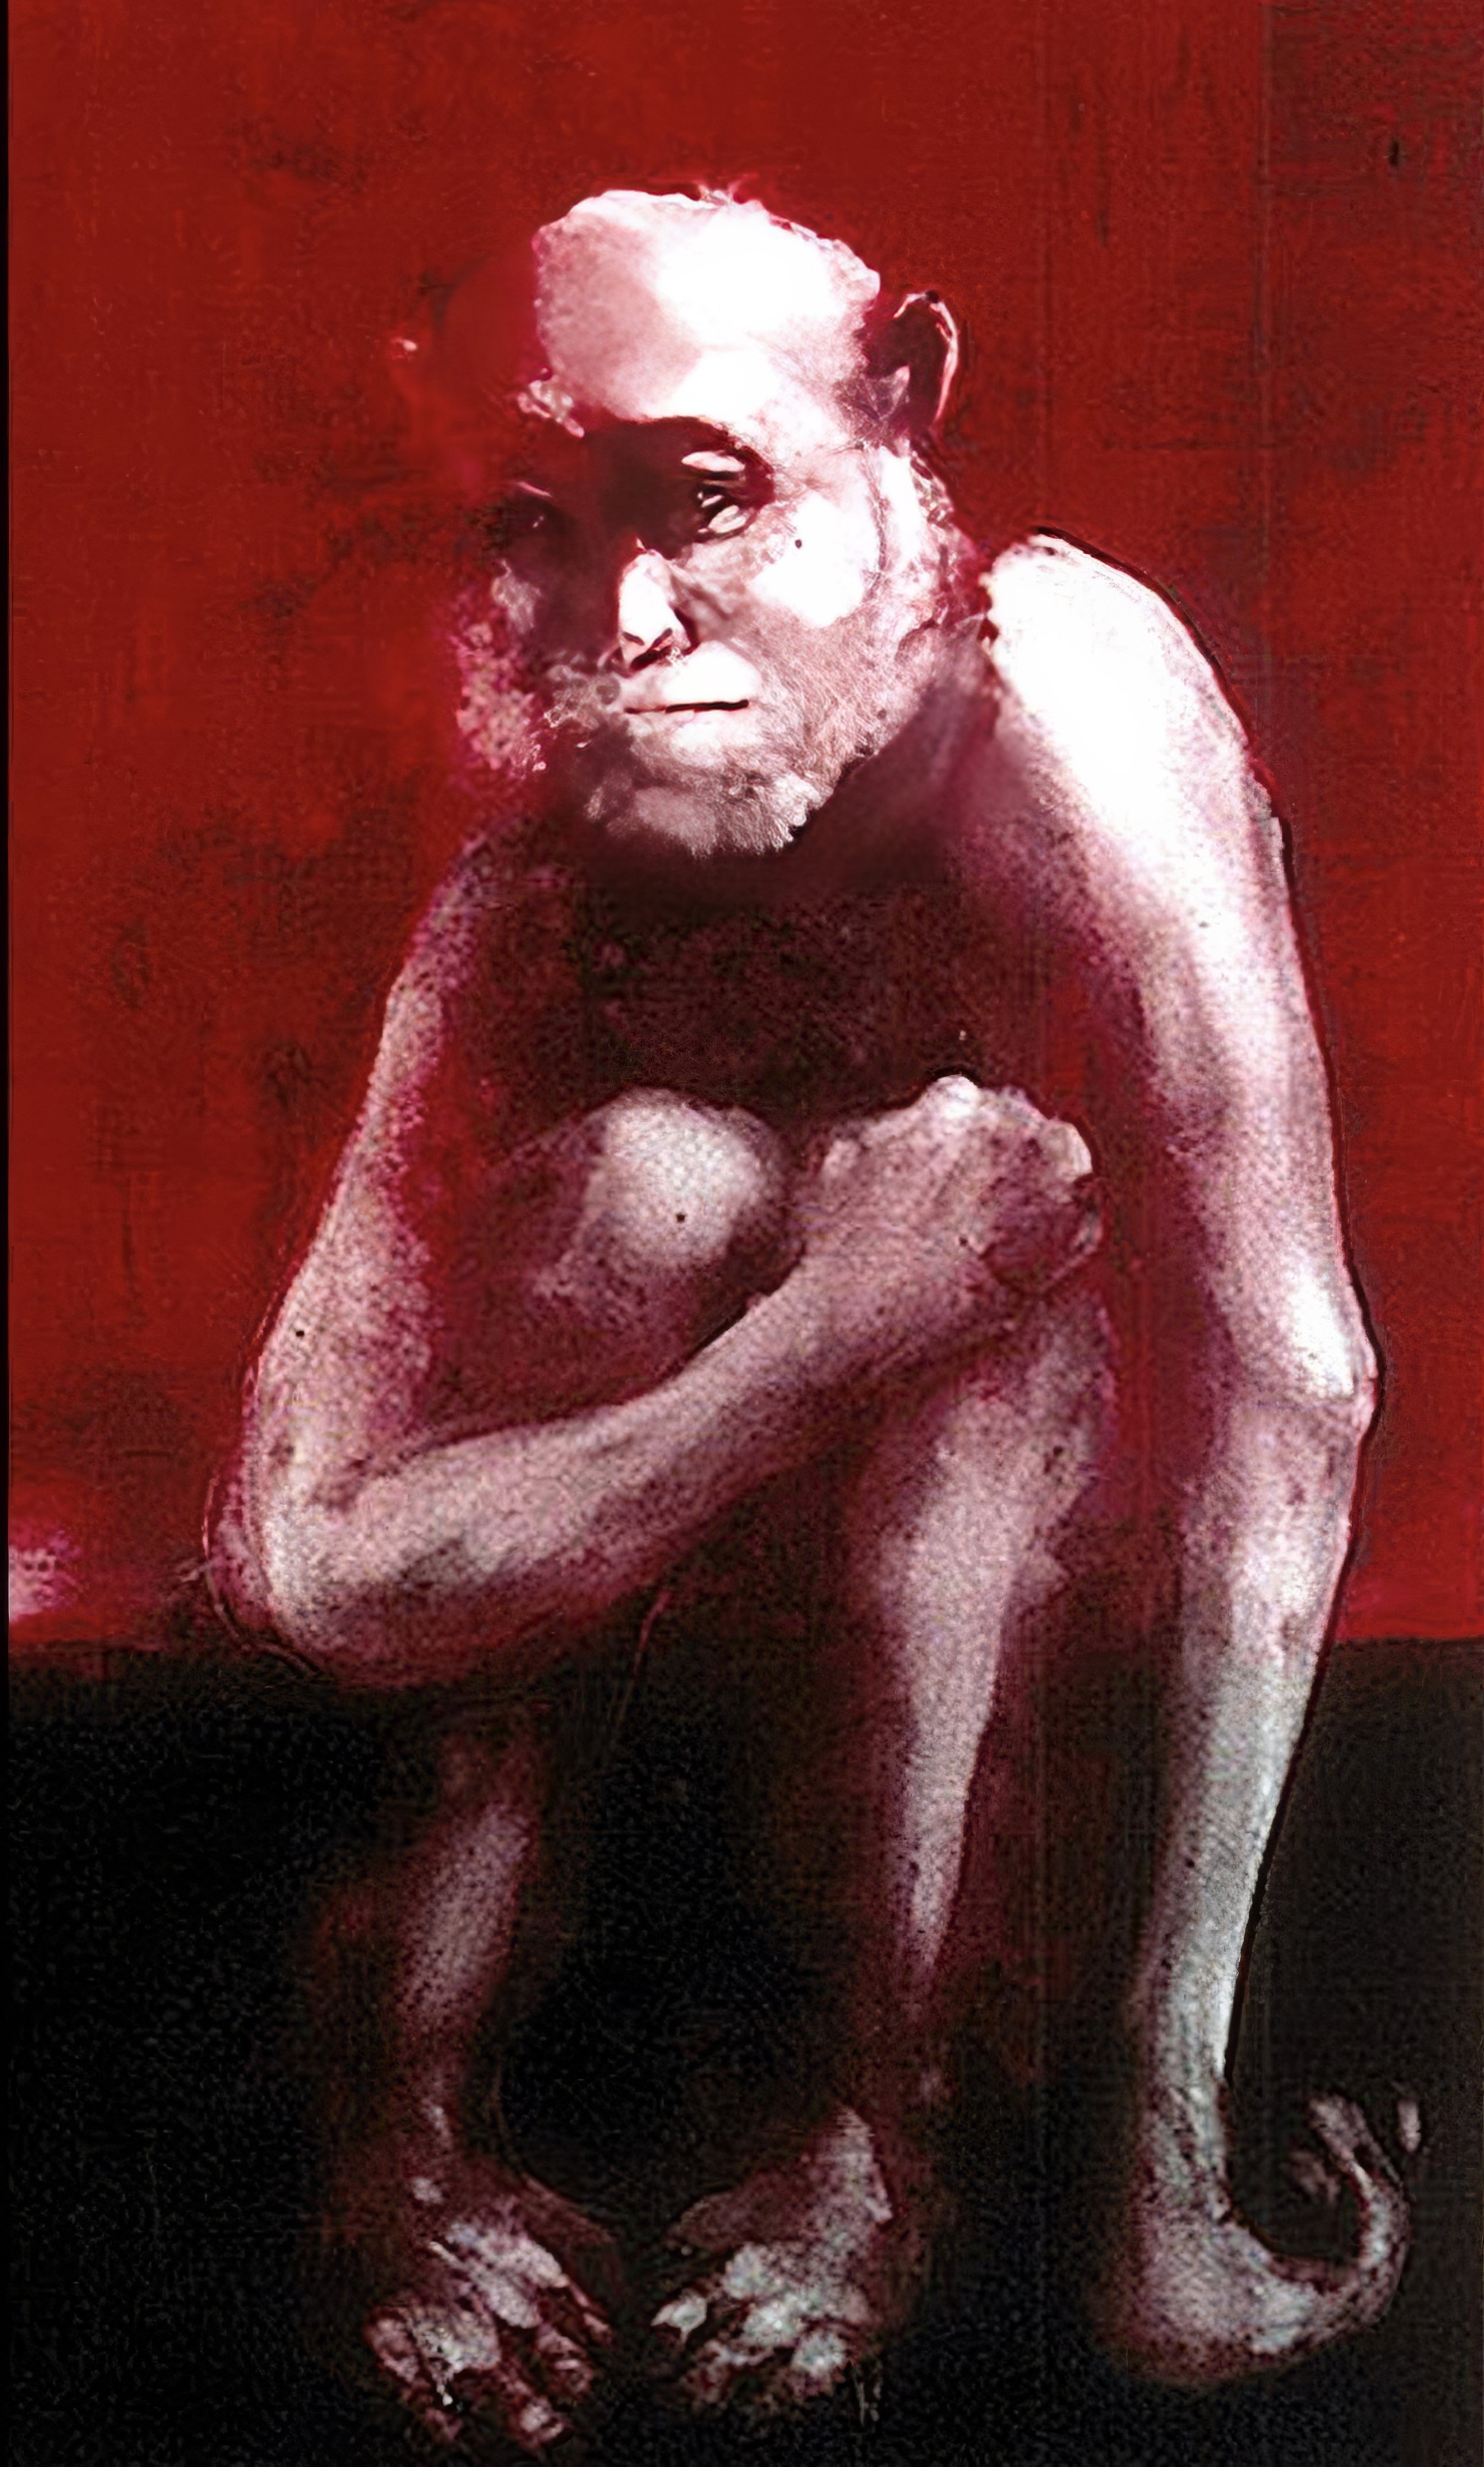 Red Monkey, 41" x 29", oil on paper